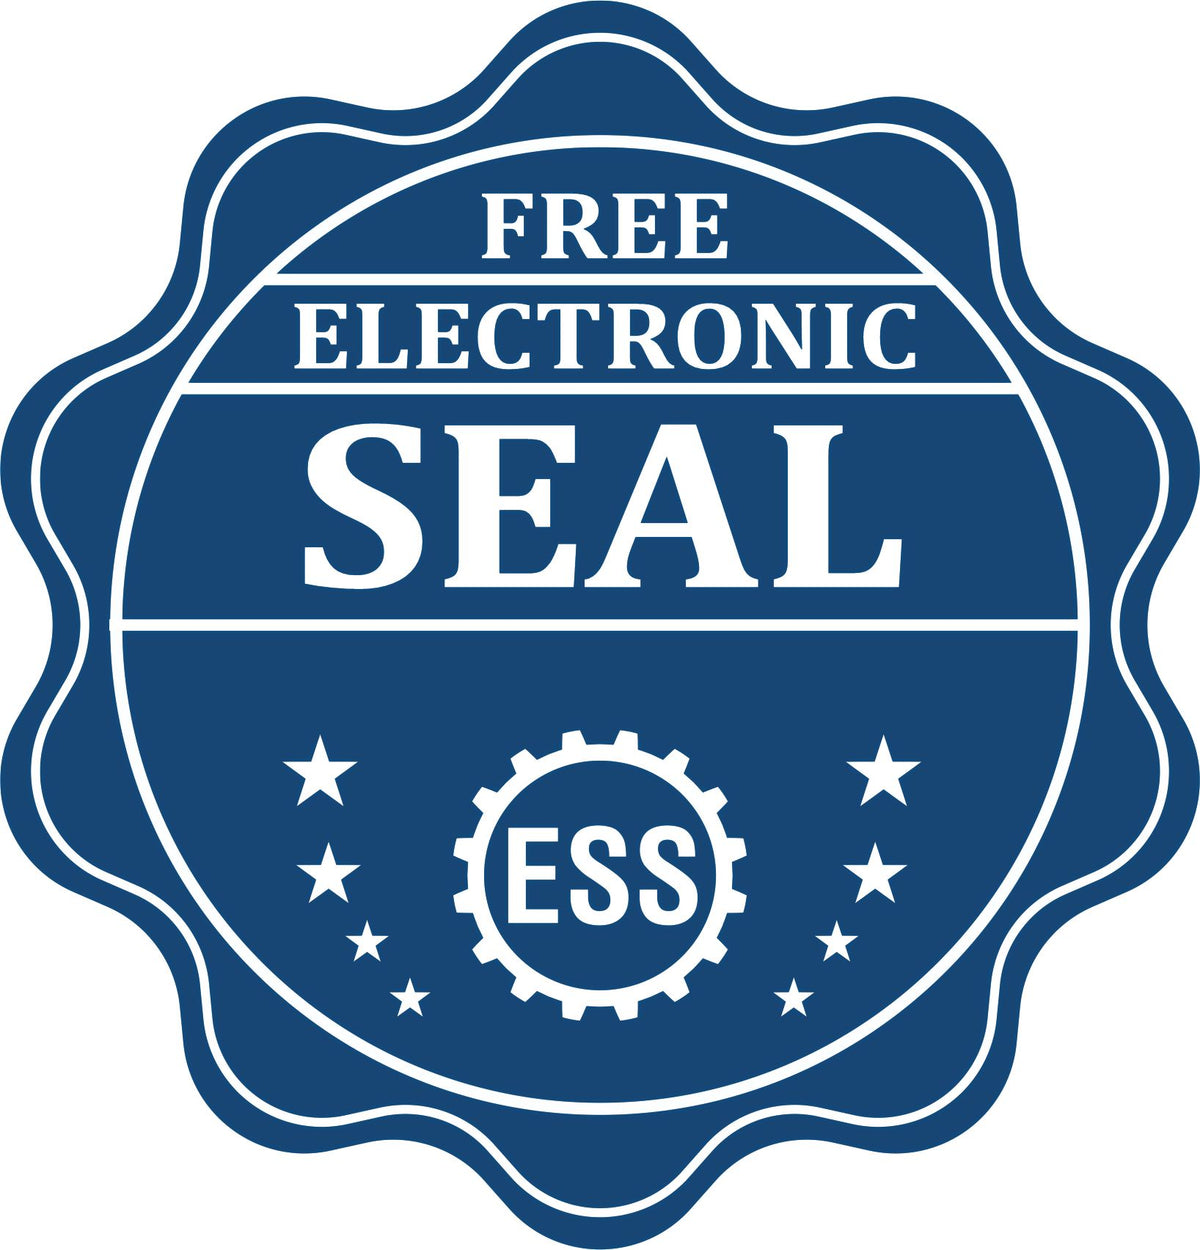 A badge showing a free electronic seal for the Premium MaxLight Pre-Inked Colorado Engineering Stamp with stars and the ESS gear on the emblem.